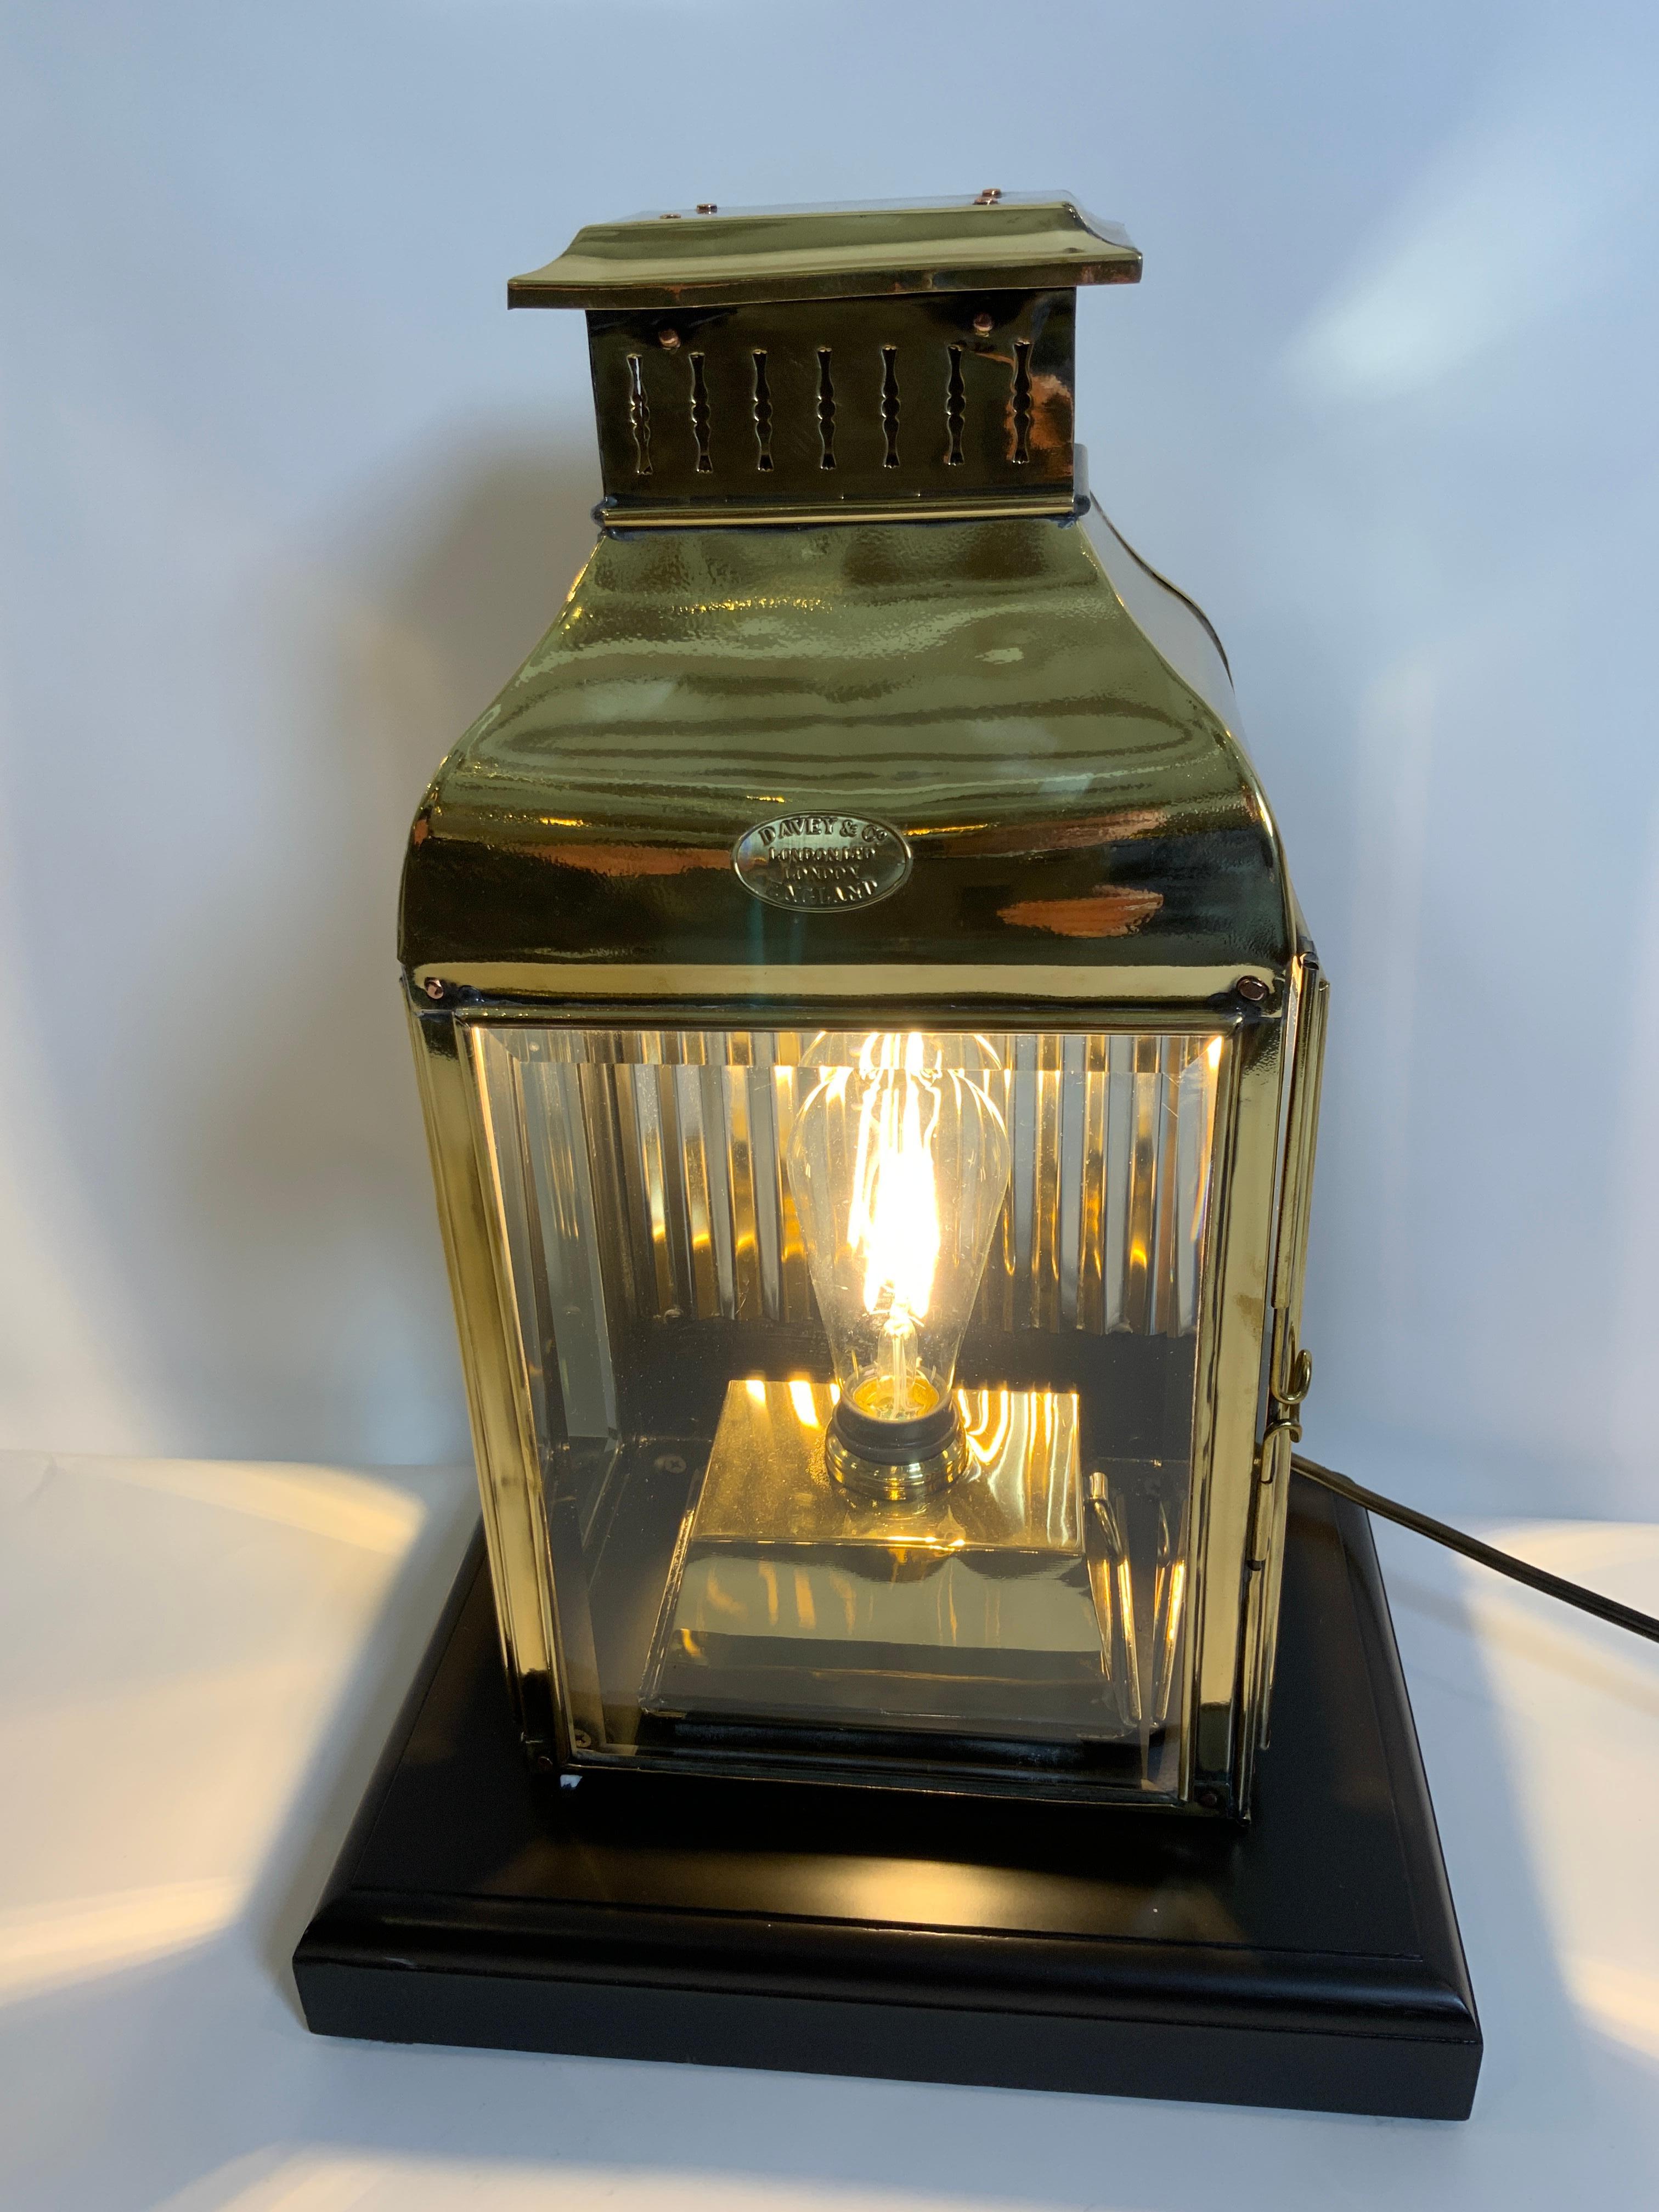 Early twentieth century highly polished and lacquered ships cabin lantern with three beveled glass panels, back reflector and hinged door. Mounted to a varnished wood base. With makers badge 